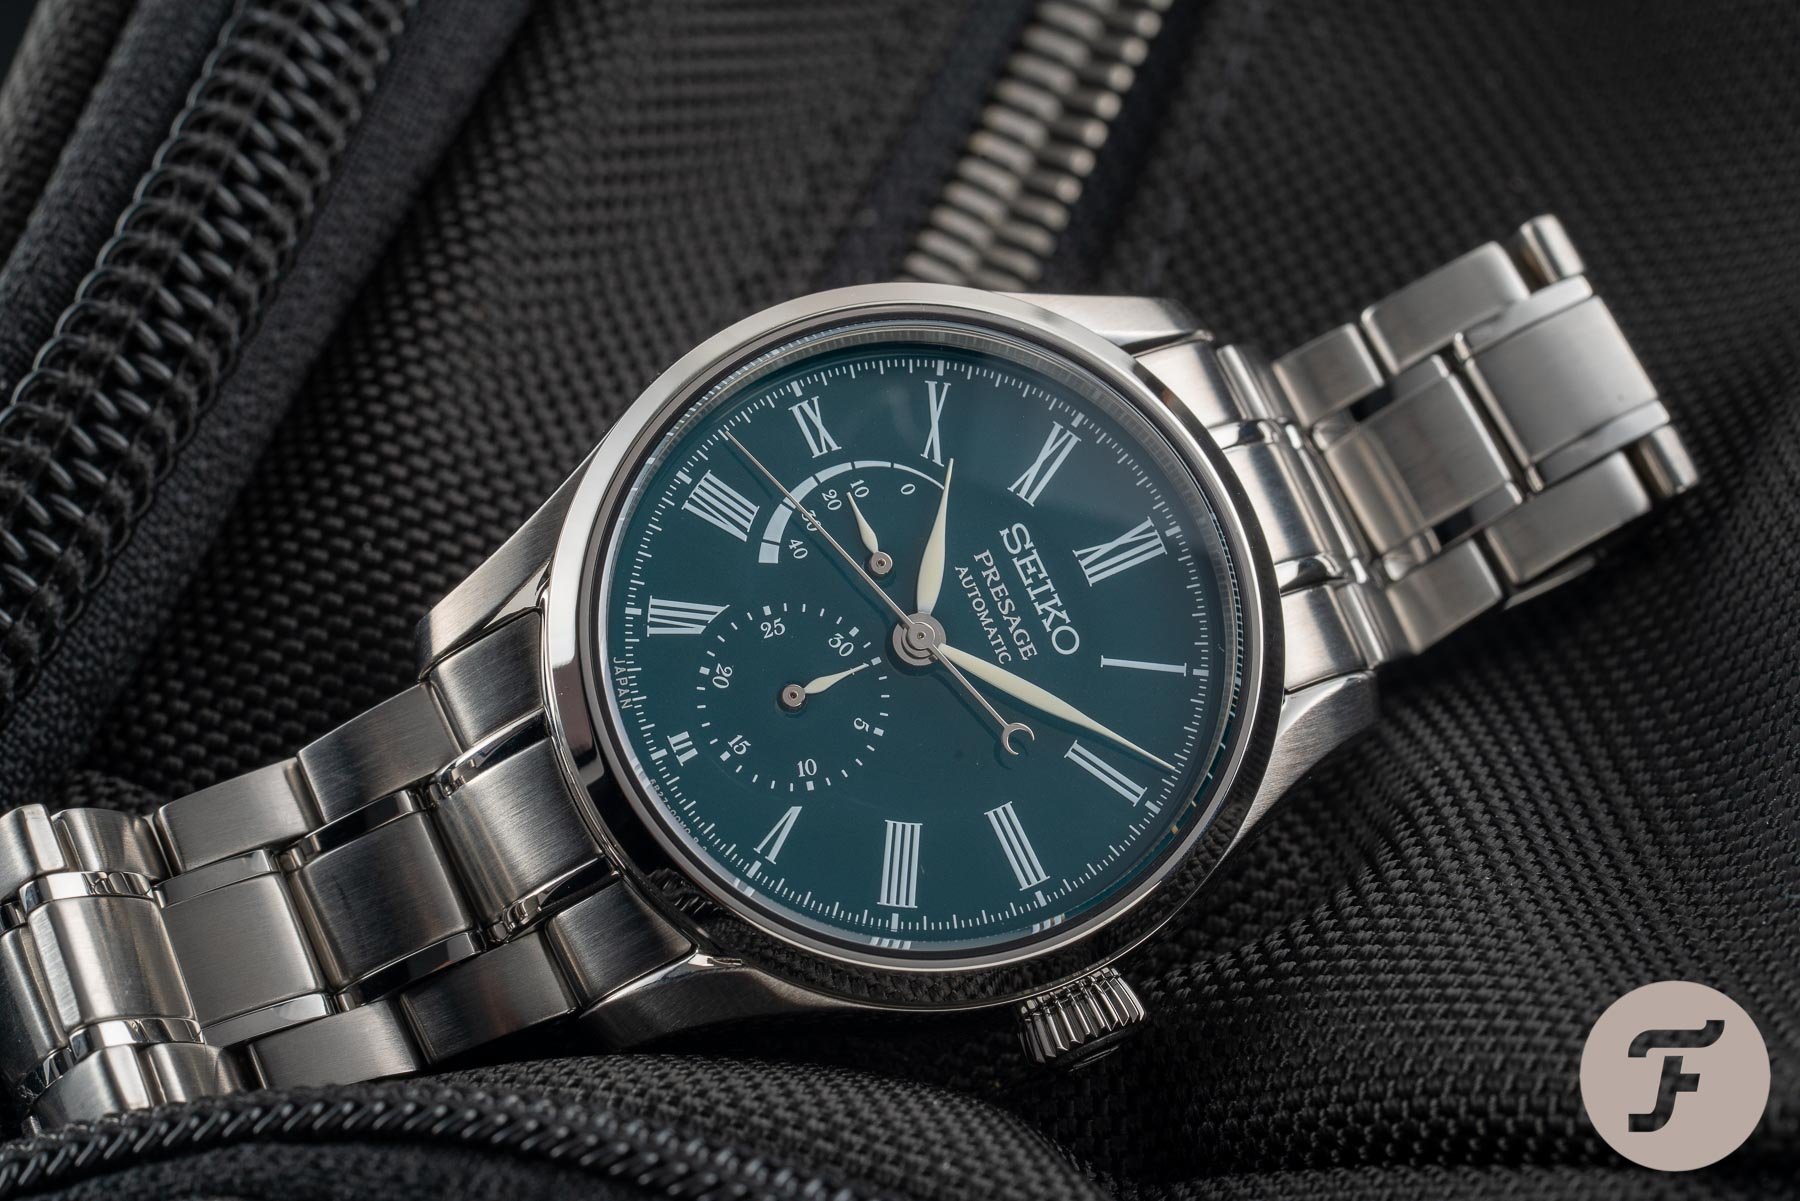 Hands-On With the Seiko Presage SPB173J1 Limited Edition Watch